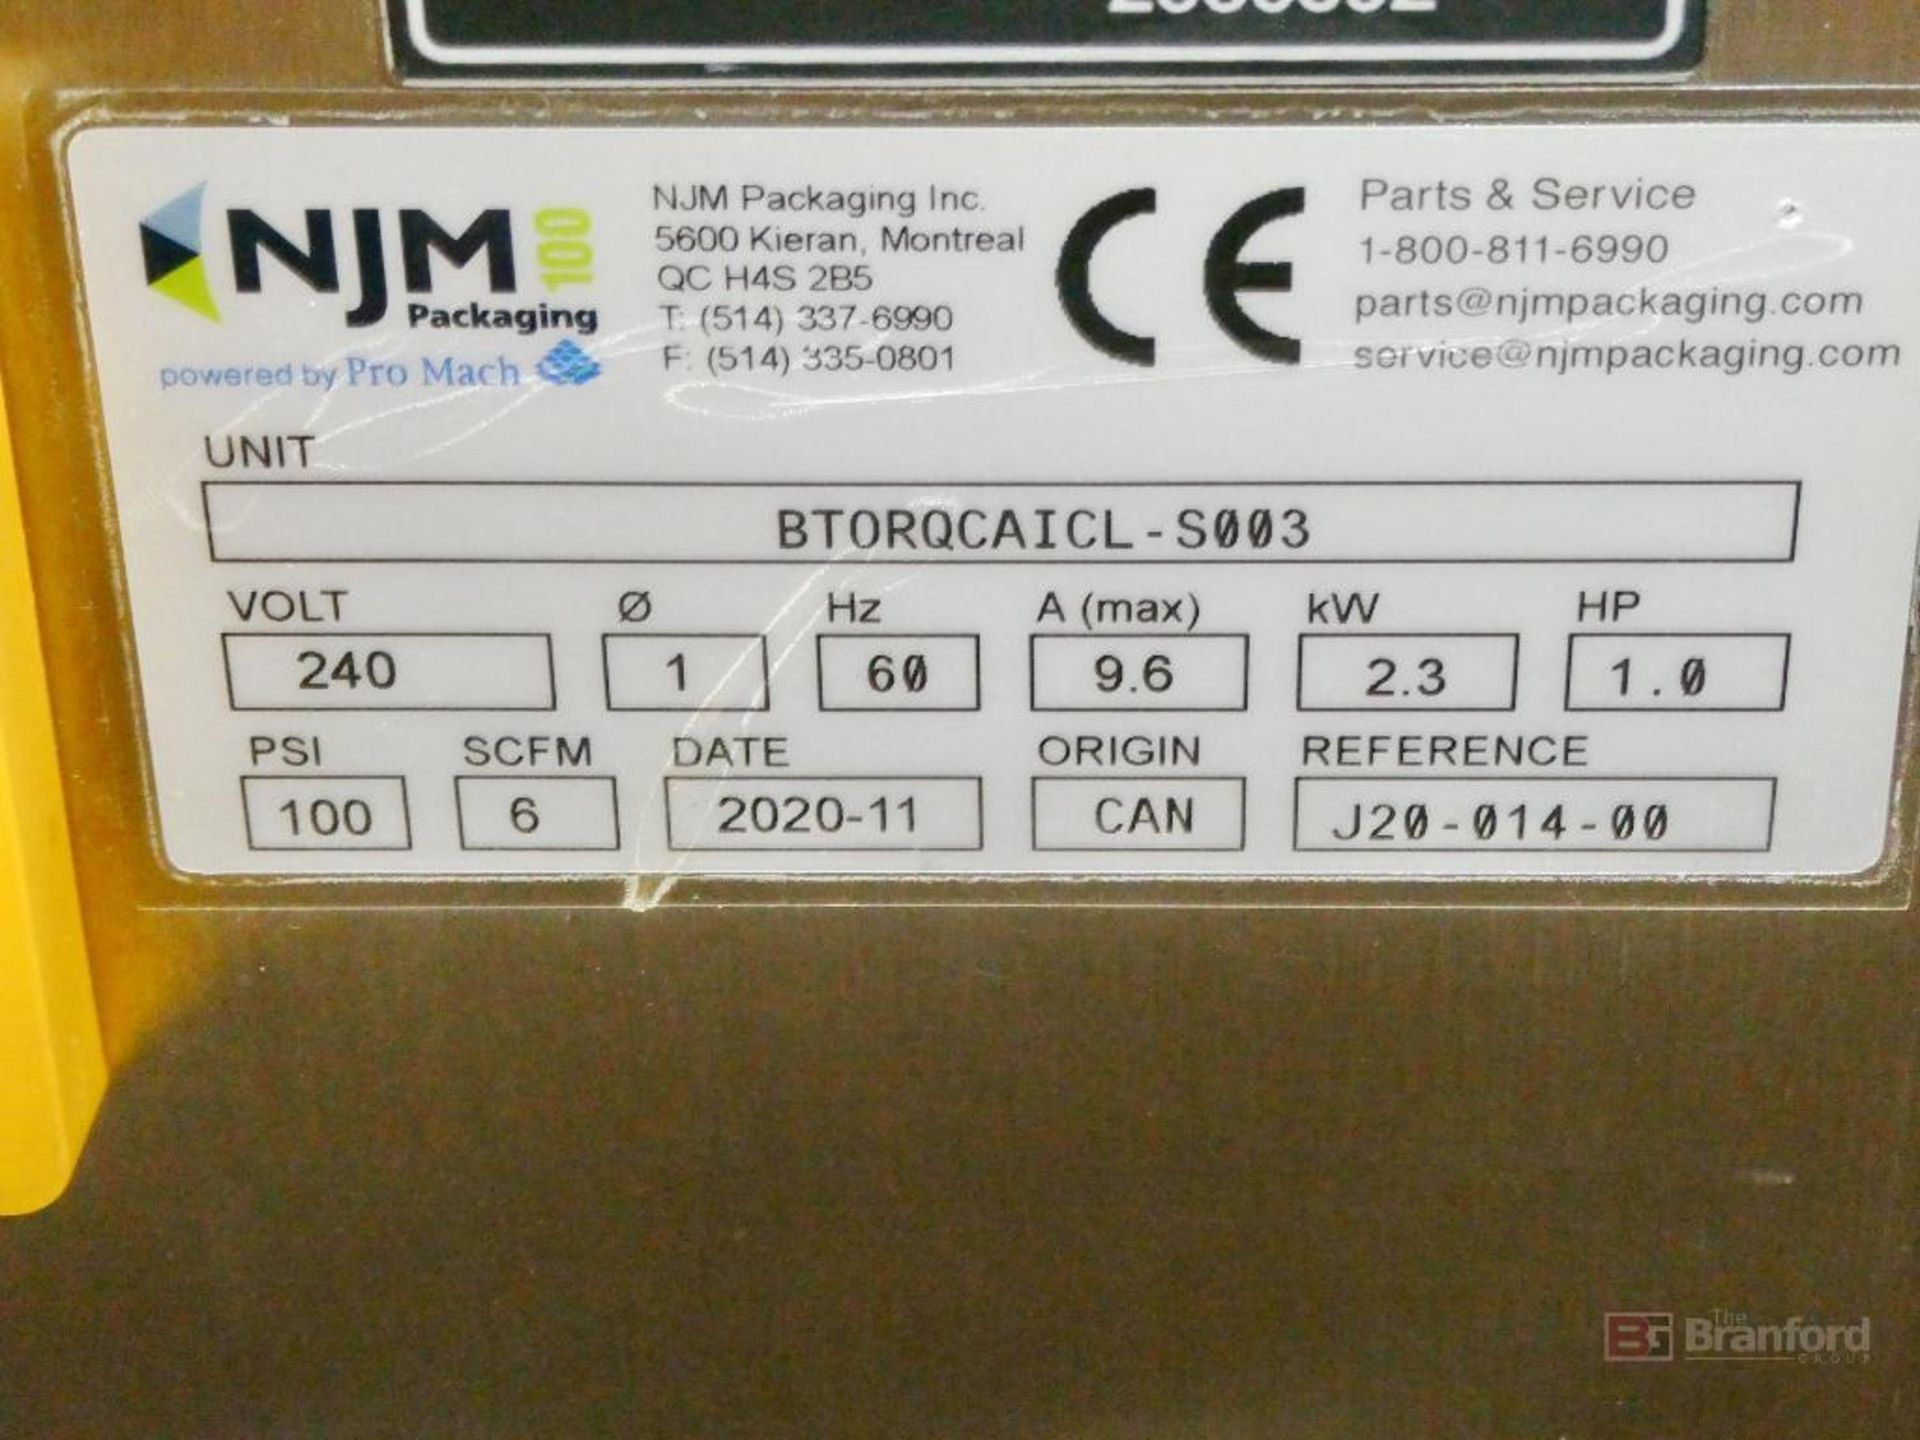 2020 NJM Packaging Model Beltorque BTIC, Stainless Steel Inline Capping Machine - Image 7 of 7